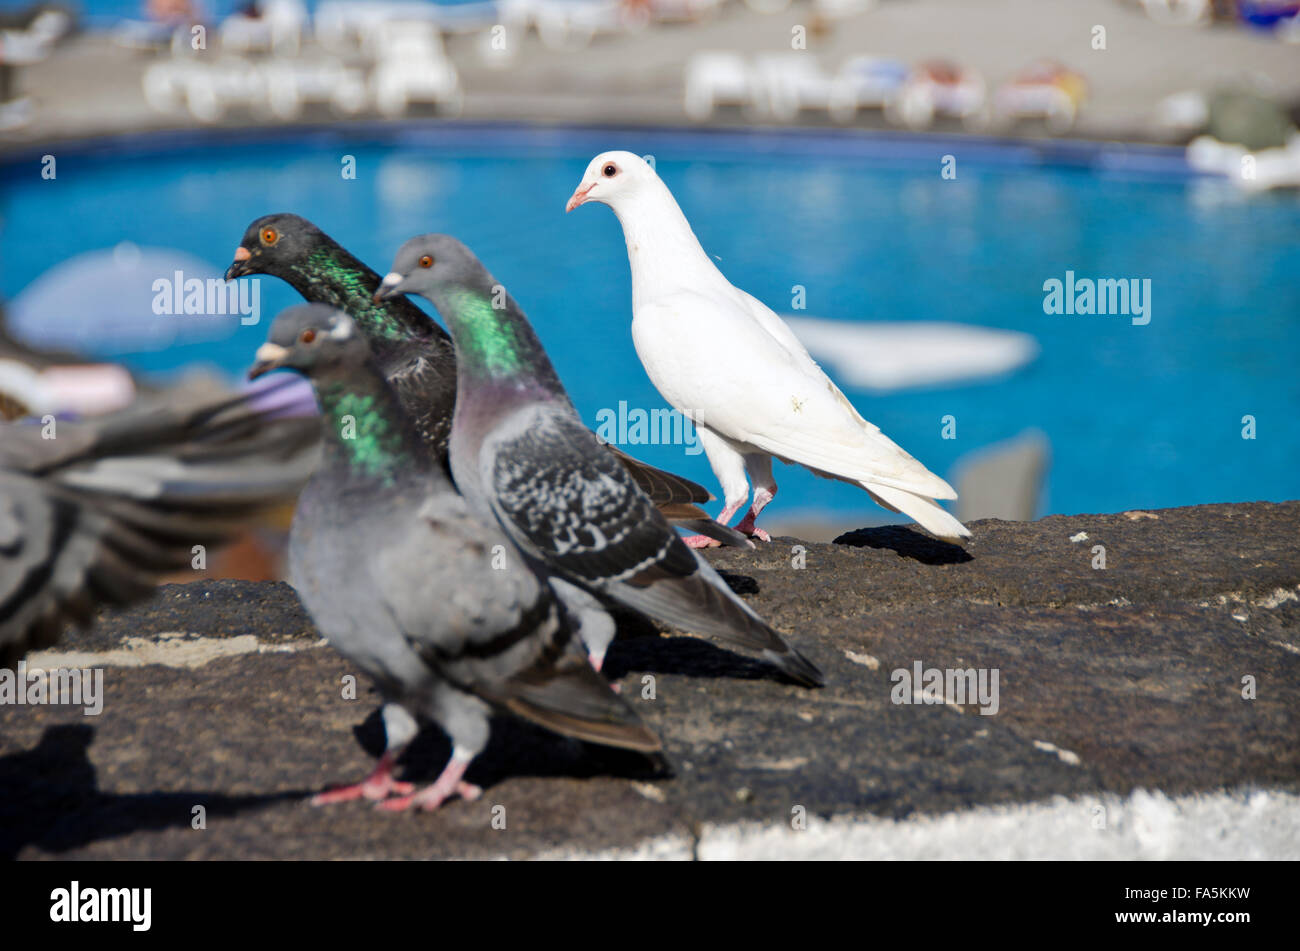 Pigeons attention held by some object of interest by the swimming pool Stock Photo